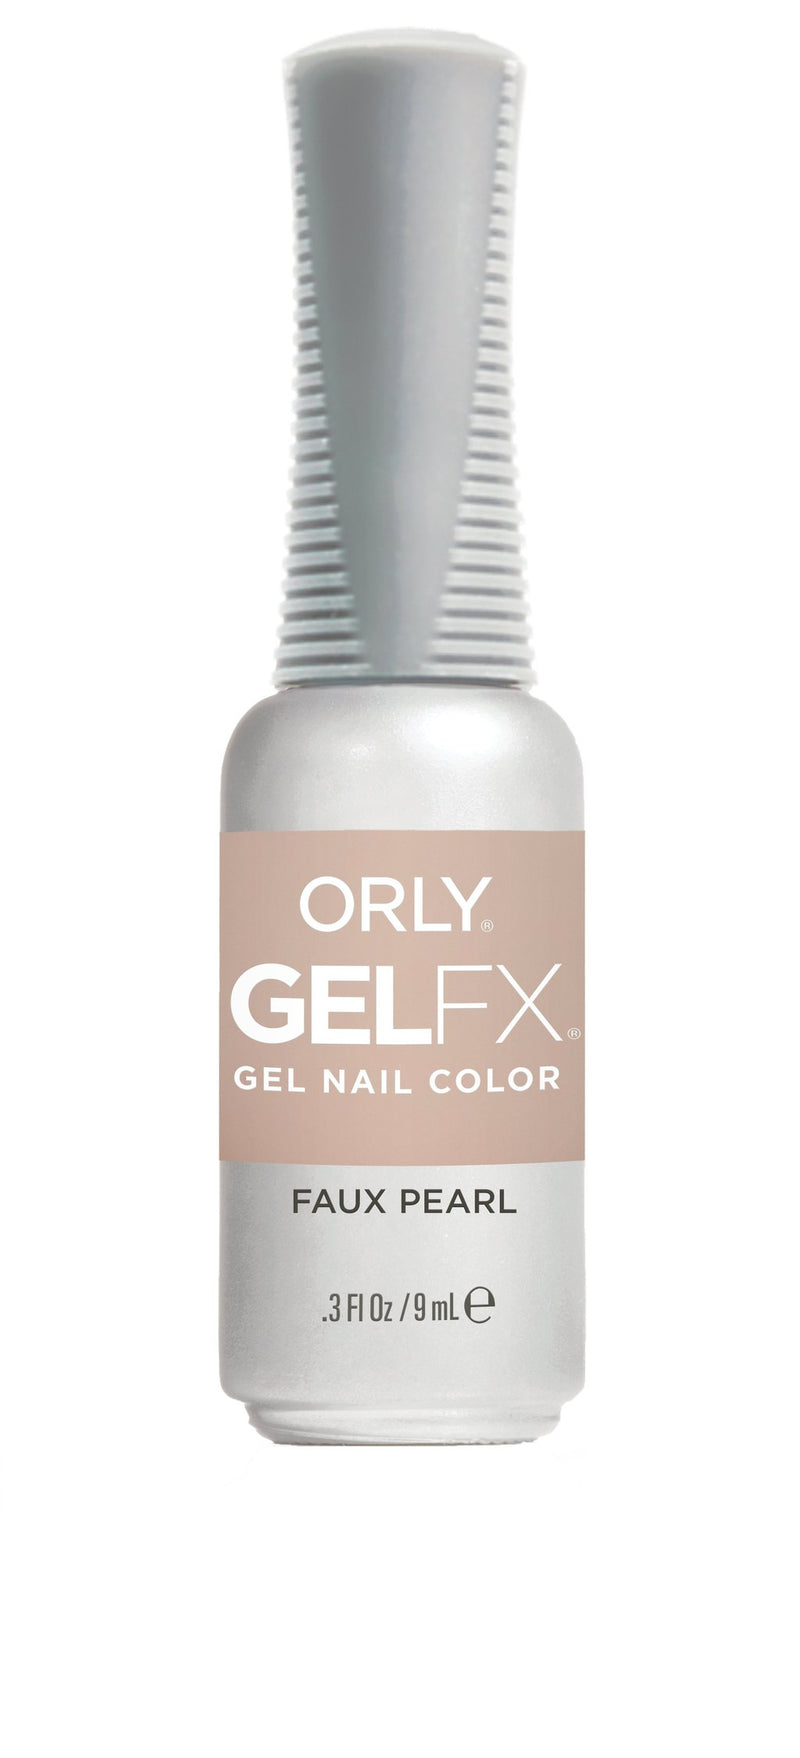 ORLY GELFX Faux Pearl